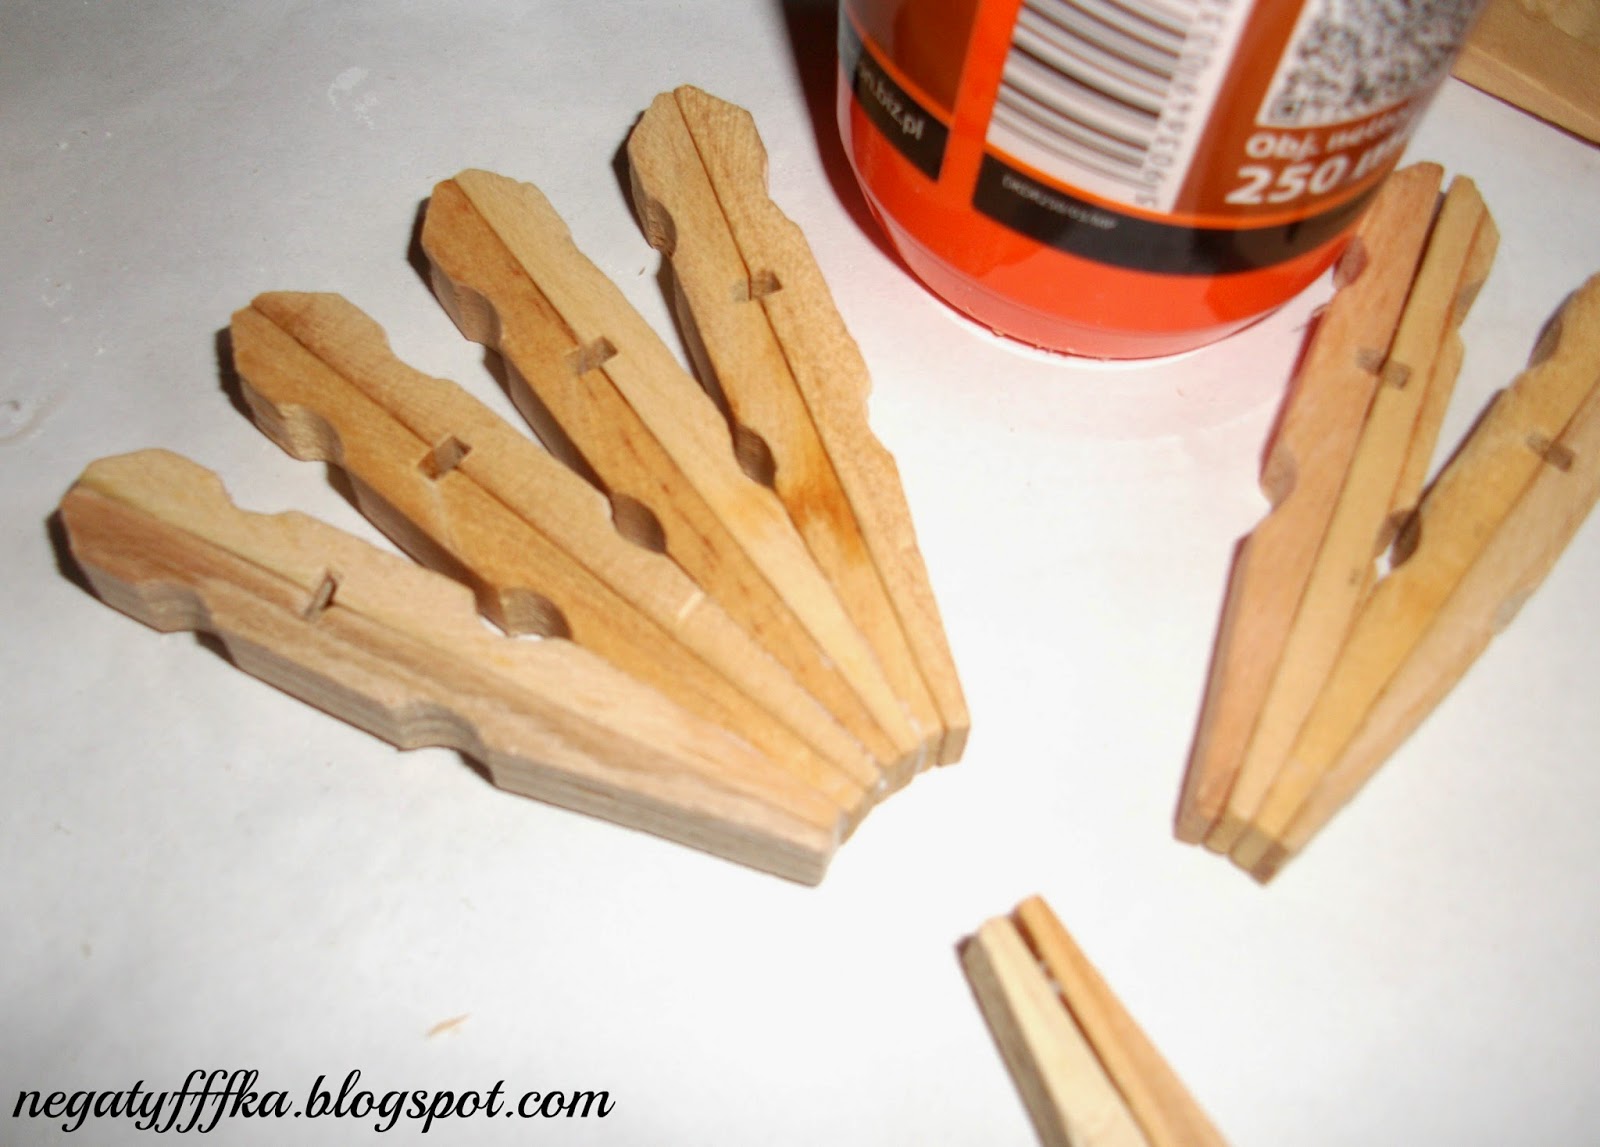 How-to-Make-a-Unique-Napkin-Holder-from-Clothespins-4.jpg